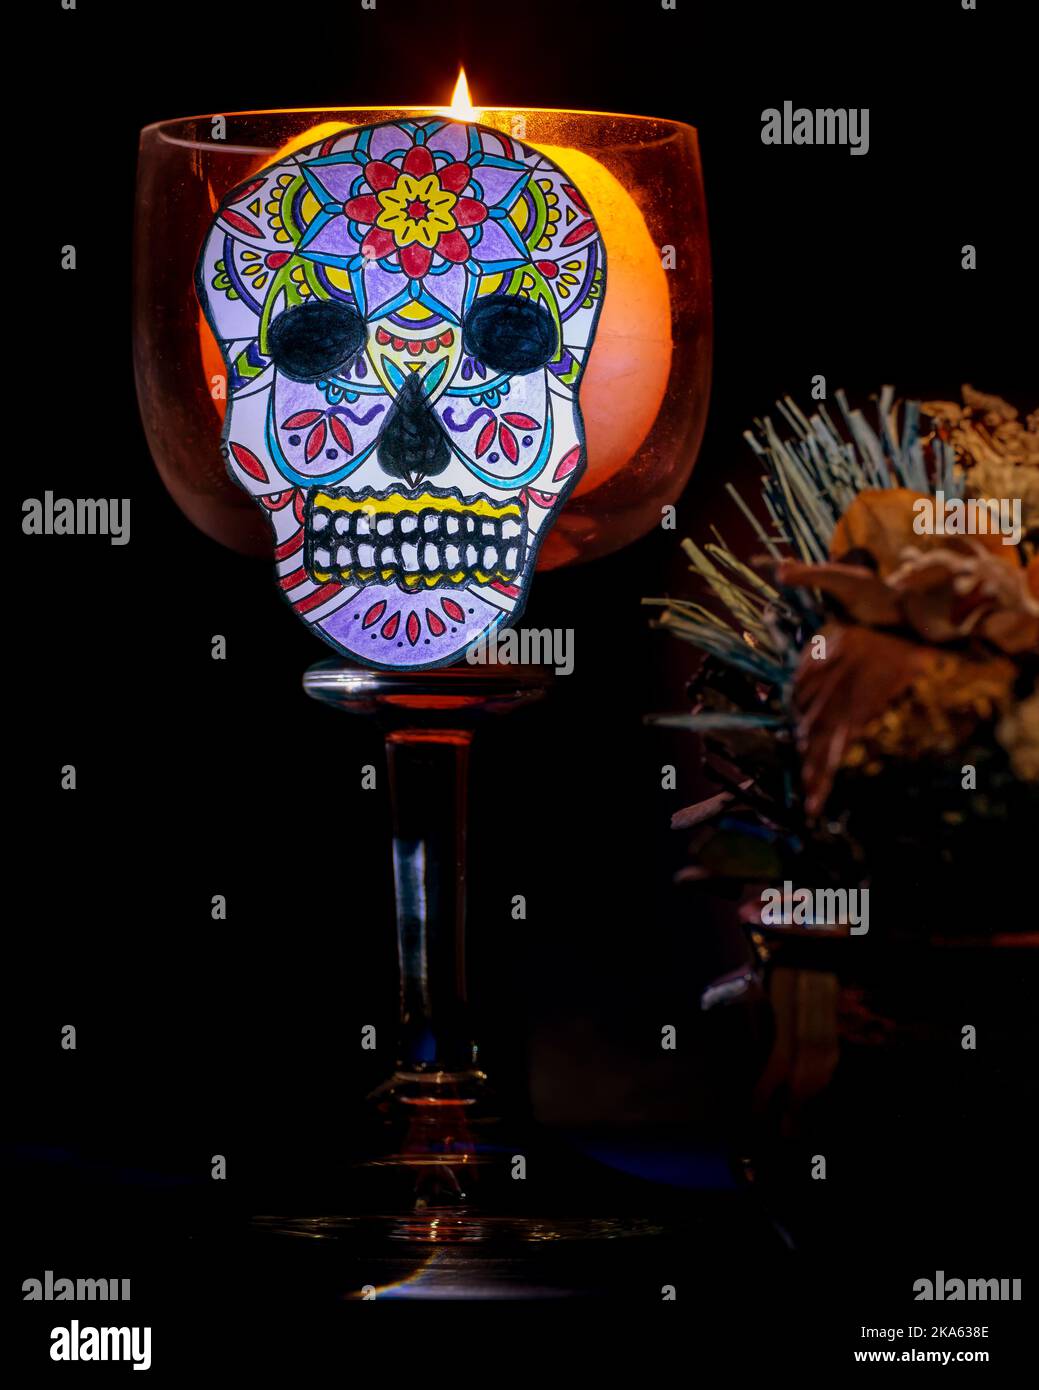 A characteristic calavera, which in Mexican tradition celebrates the day of the dead, with a lit candle next to it Stock Photo